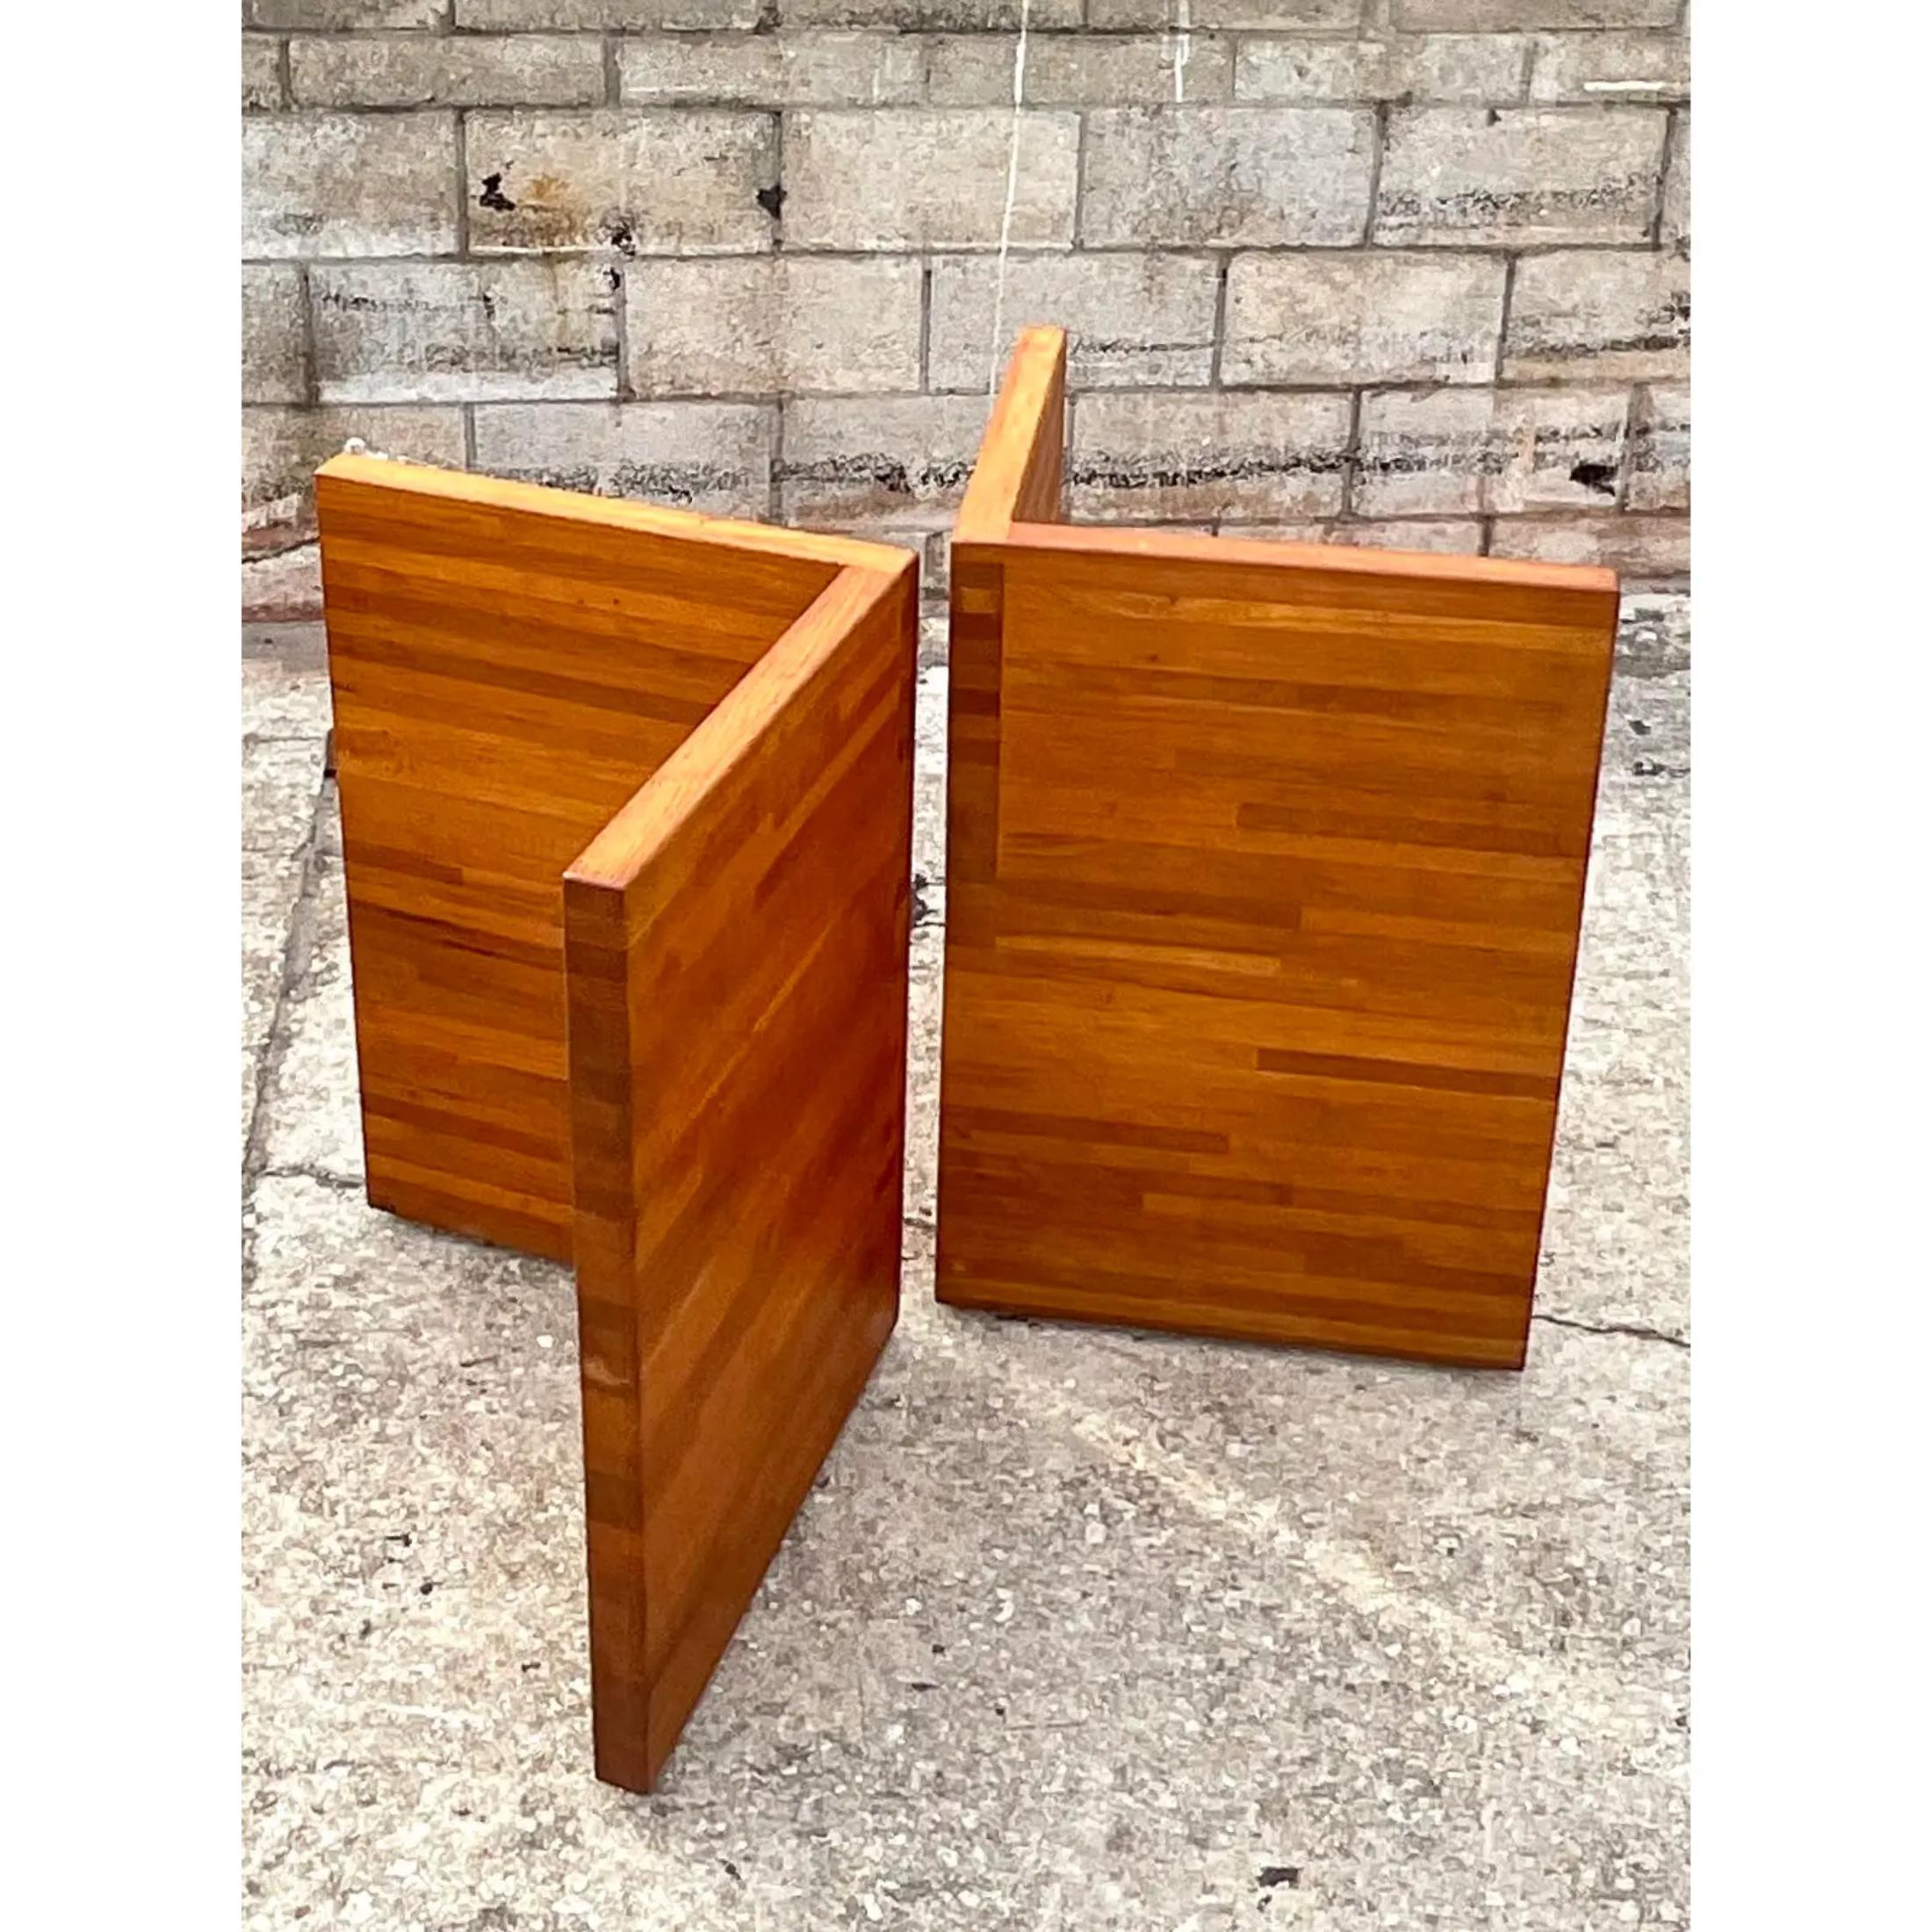 Midcentury Slab Butcher Block L Shaped Dining Table Pedestals - a Pair 2